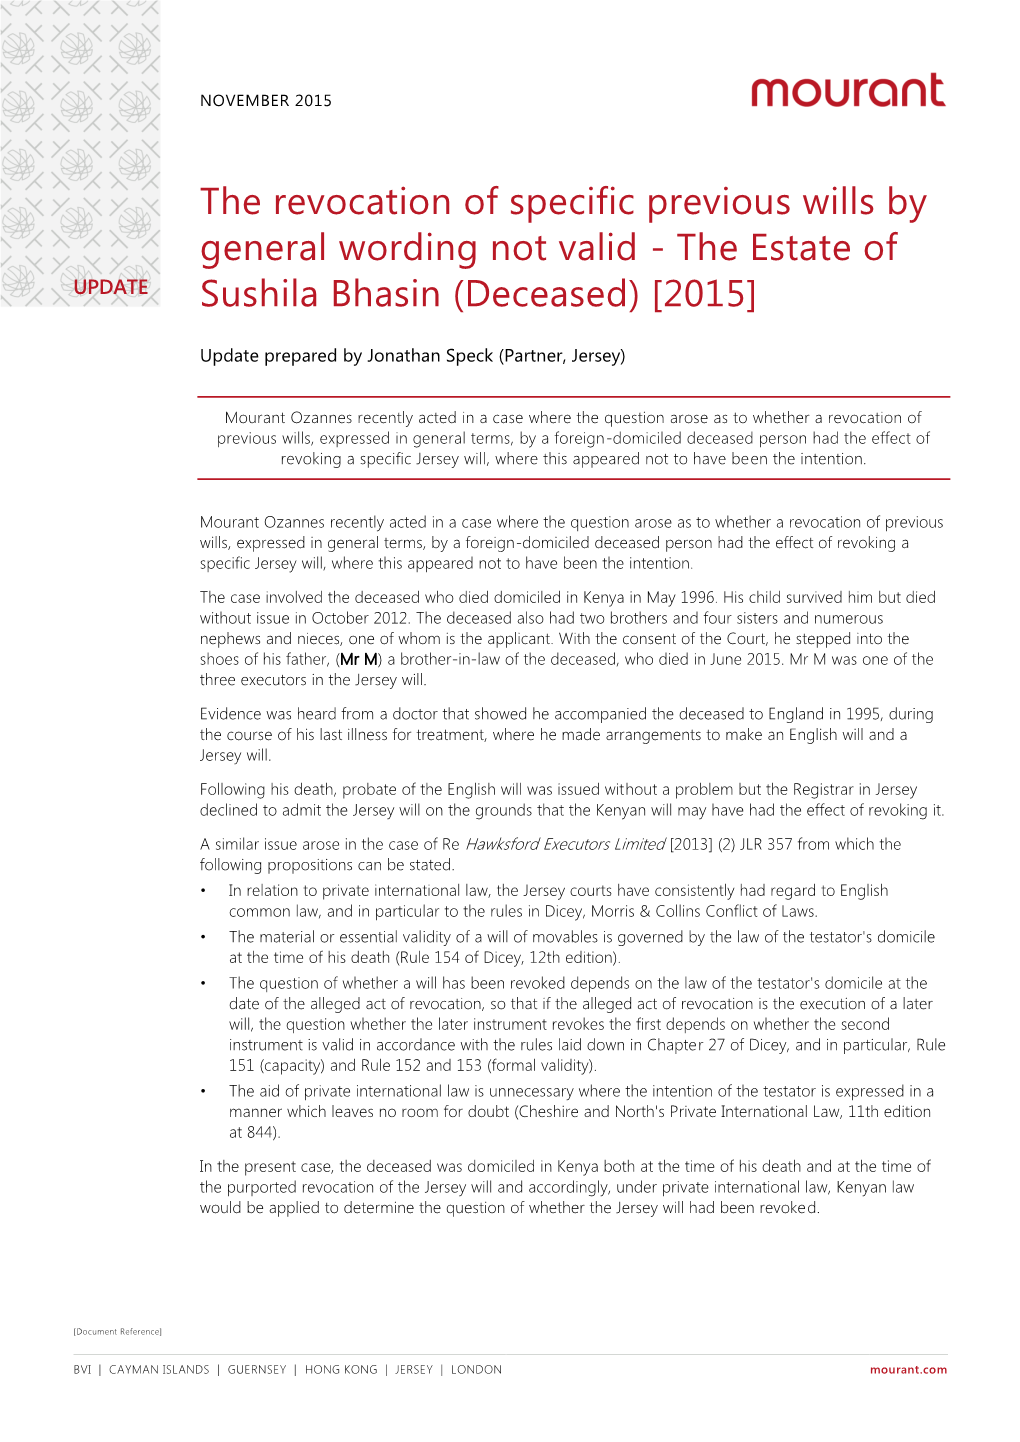 The Revocation of Specific Previous Wills by General Wording Not Valid - the Estate of UPDATE Sushila Bhasin (Deceased) [2015]